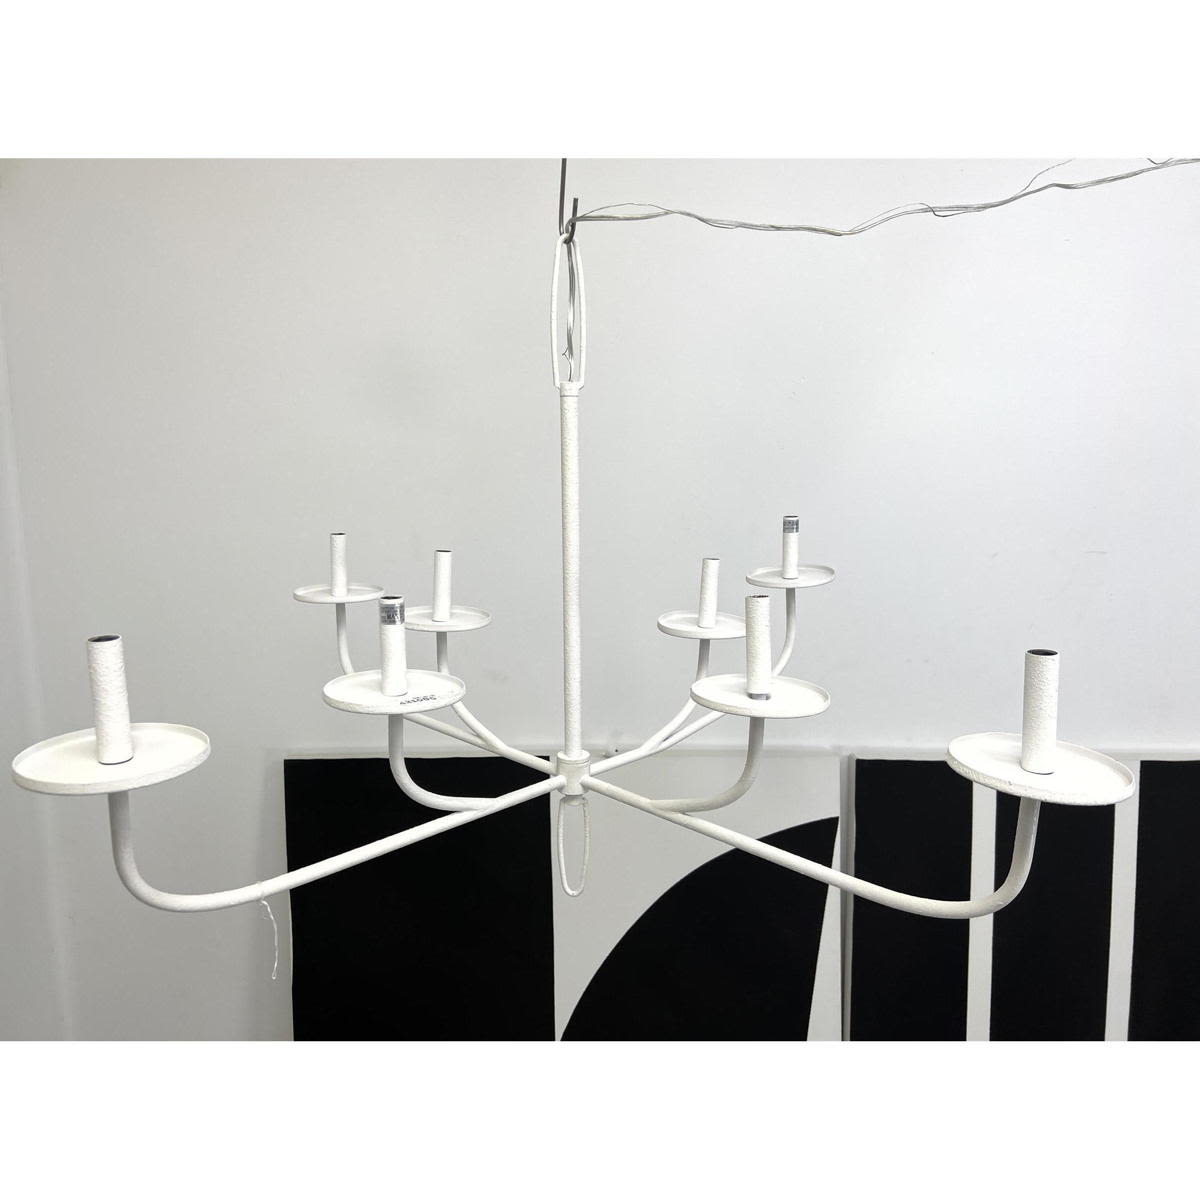 Giacometti style White Painted 2baf95